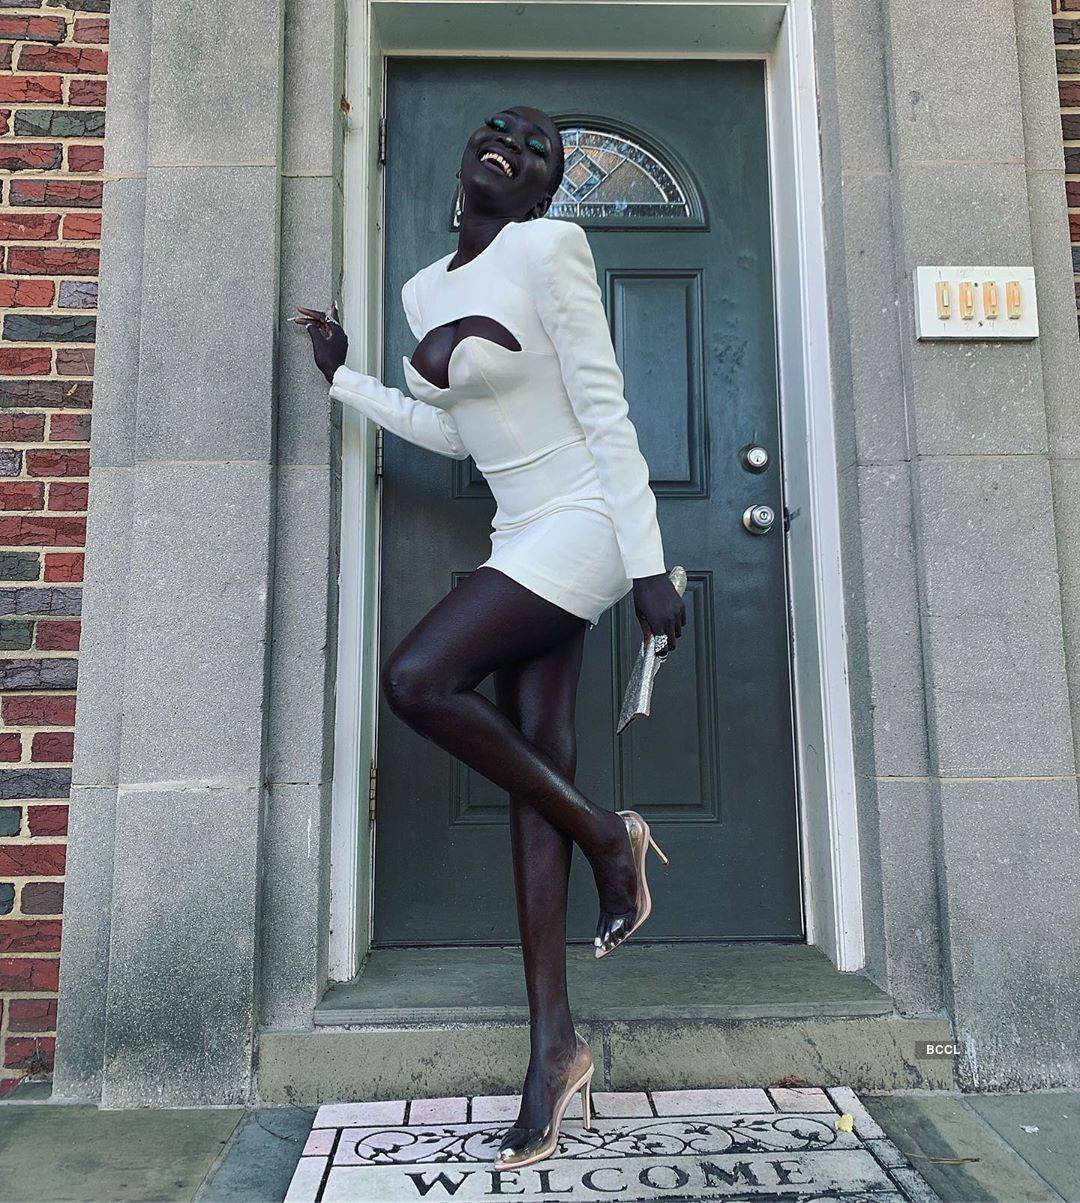 Sudanese Model Nyakim Gatwech Dubbed As ‘queen Of The Dark Becomes The Next Instagram Sensation 